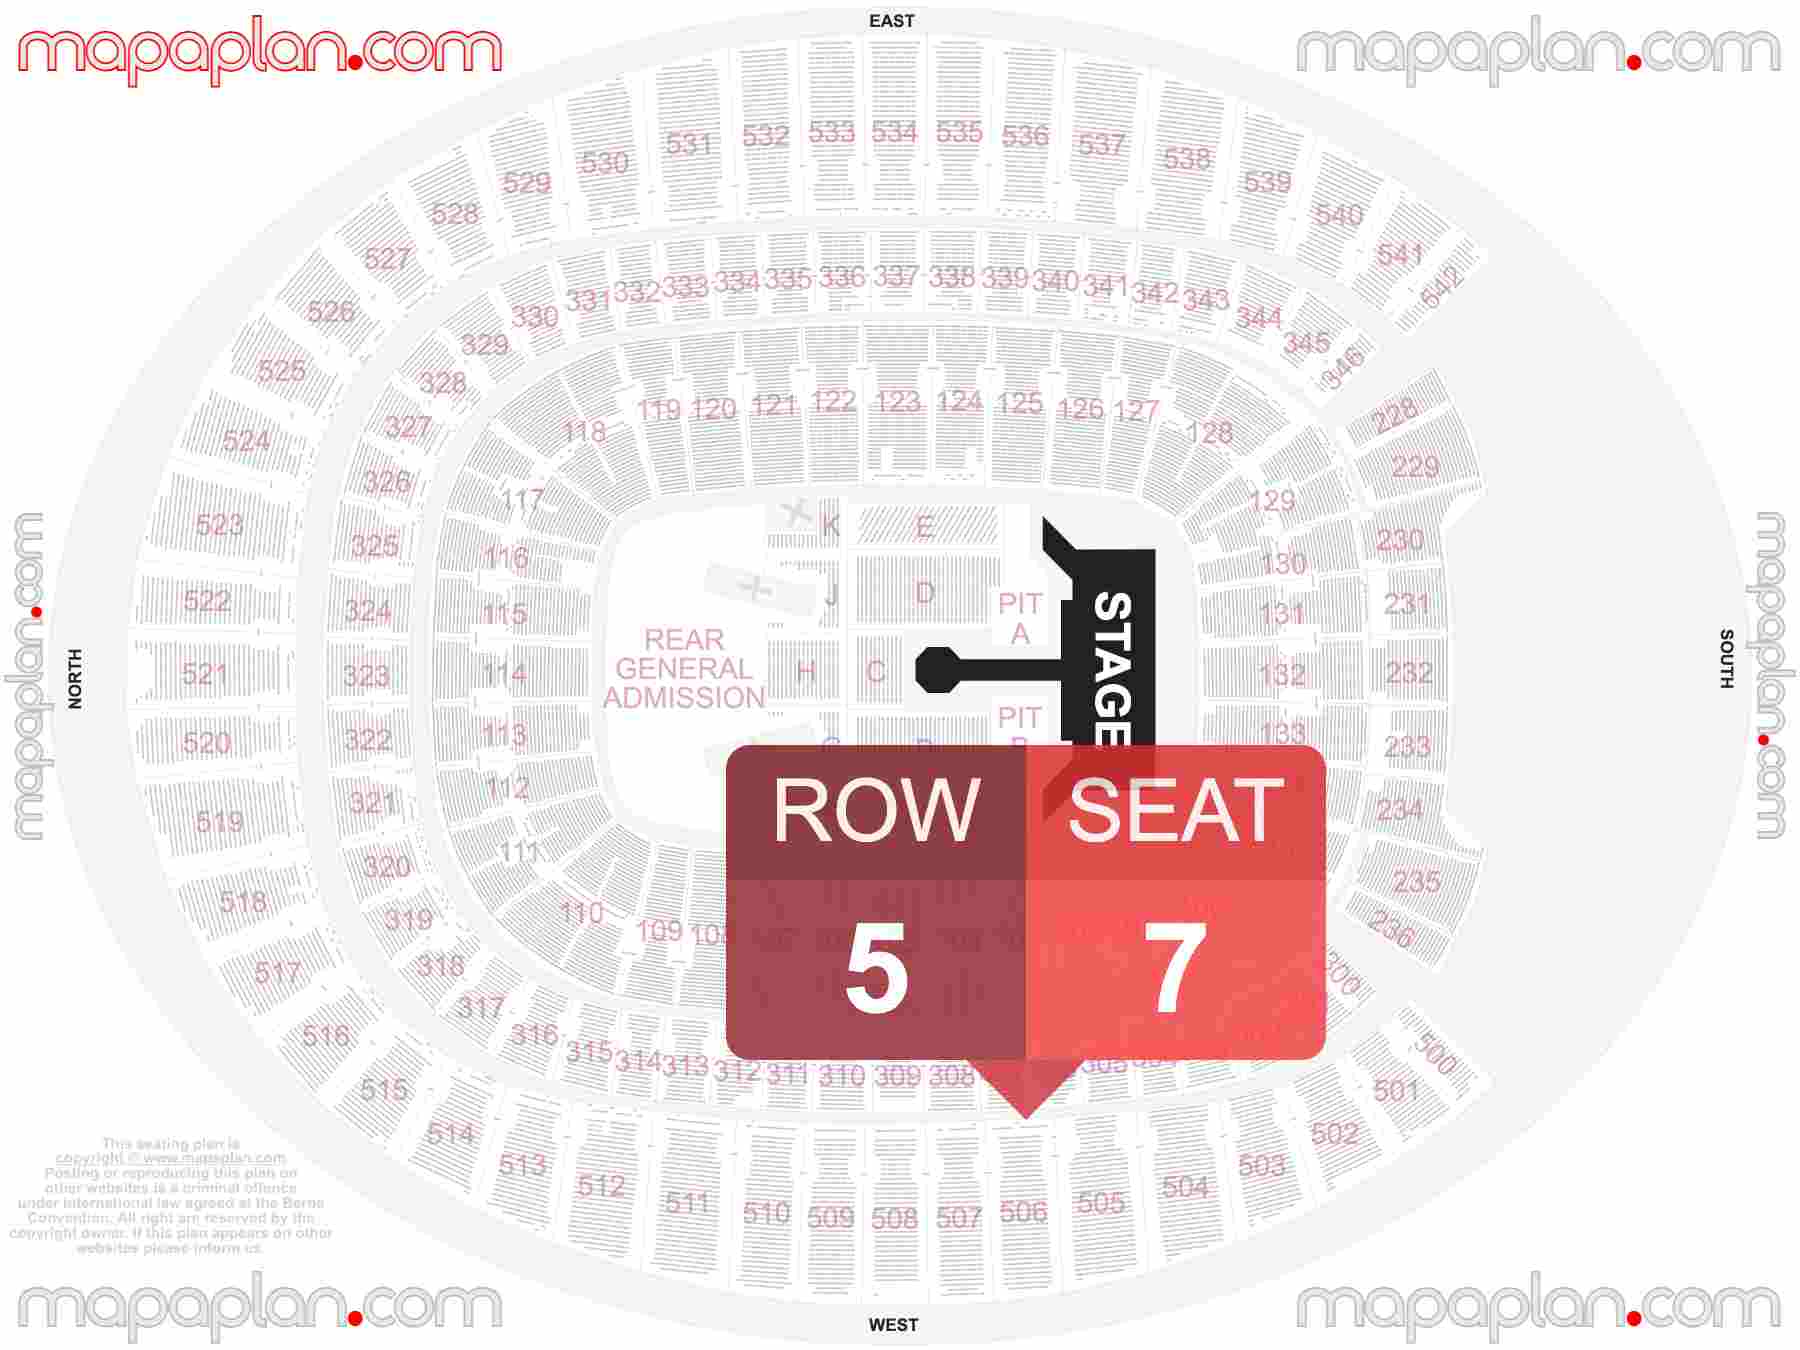 Denver Empower Field at Mile High seating chart Concert with extended catwalk runway B-stage and PIT floor standing room only seating chart with exact section numbers showing best rows and seats selection 3d layout - Best interactive seat finder tool with precise detailed location data